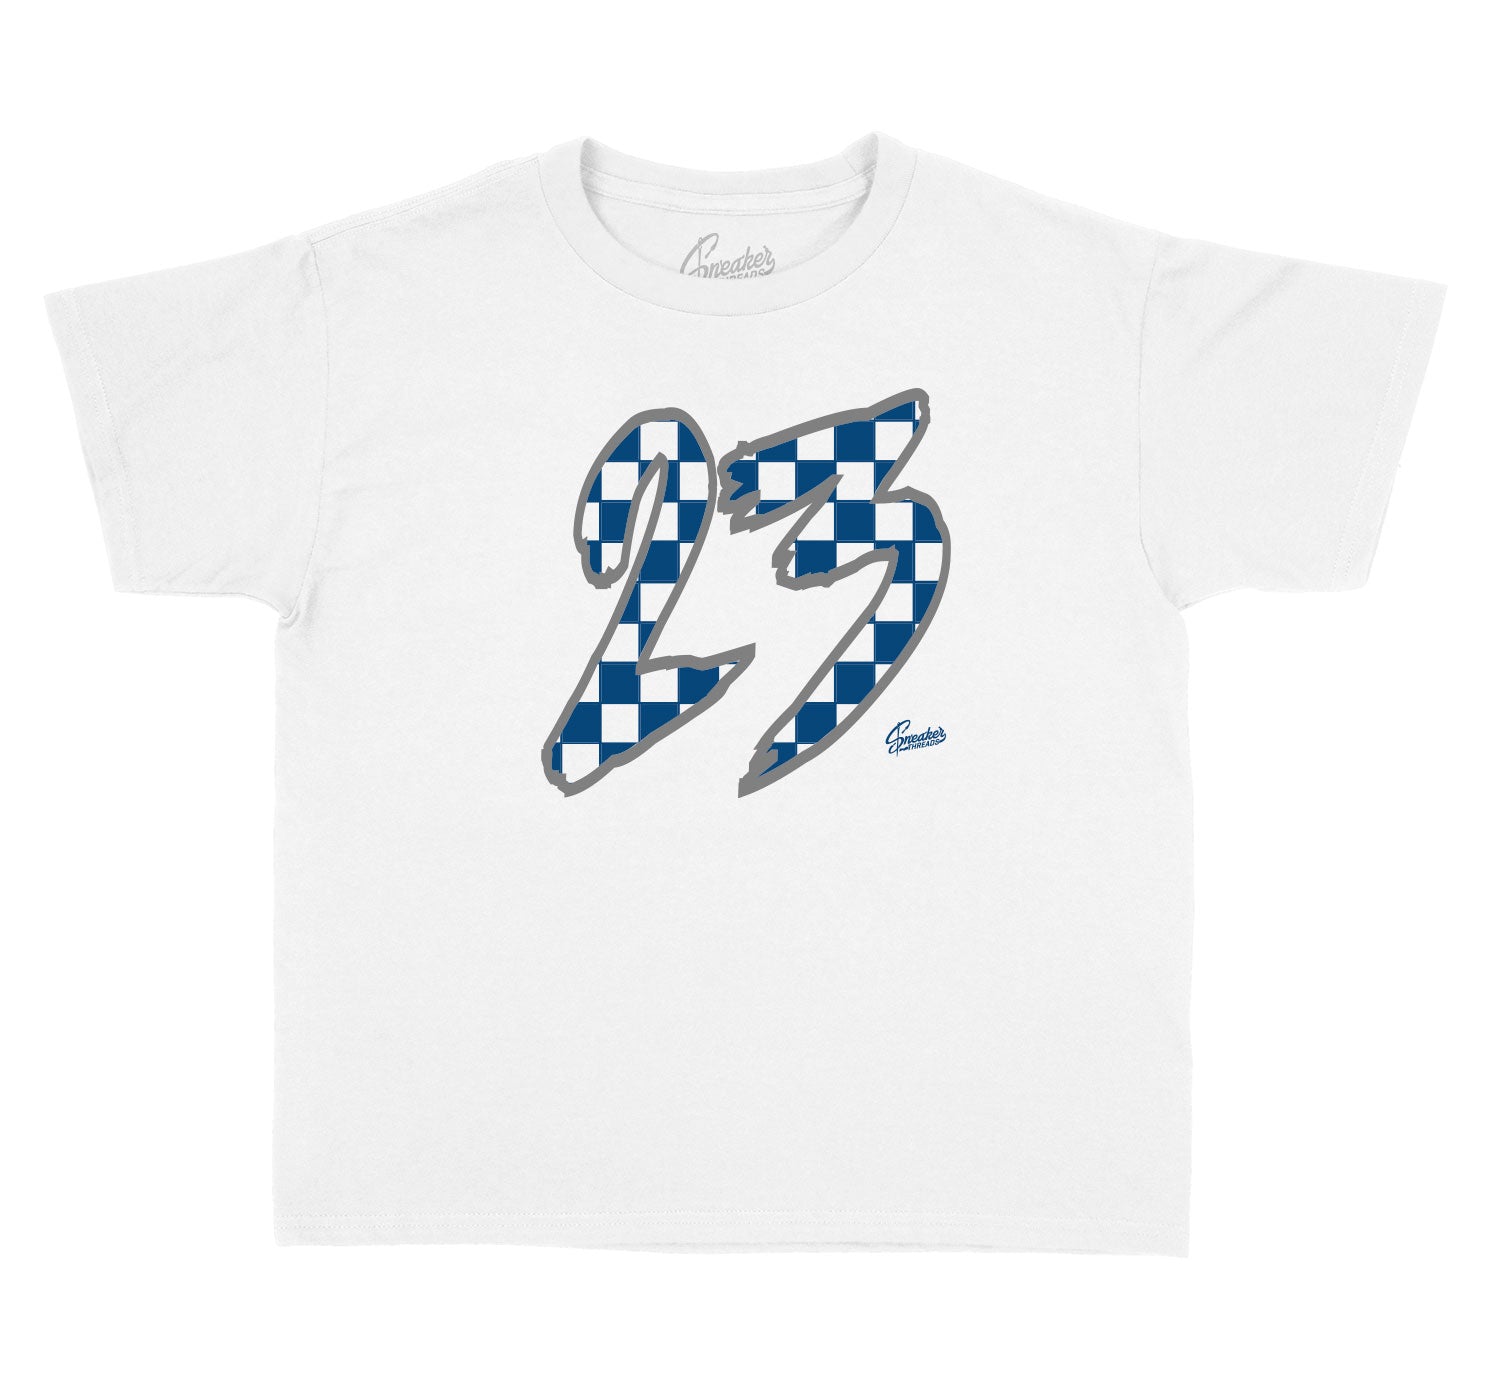 Flint Jordan 13 sneaker collection matches with ladies t shirt collection 